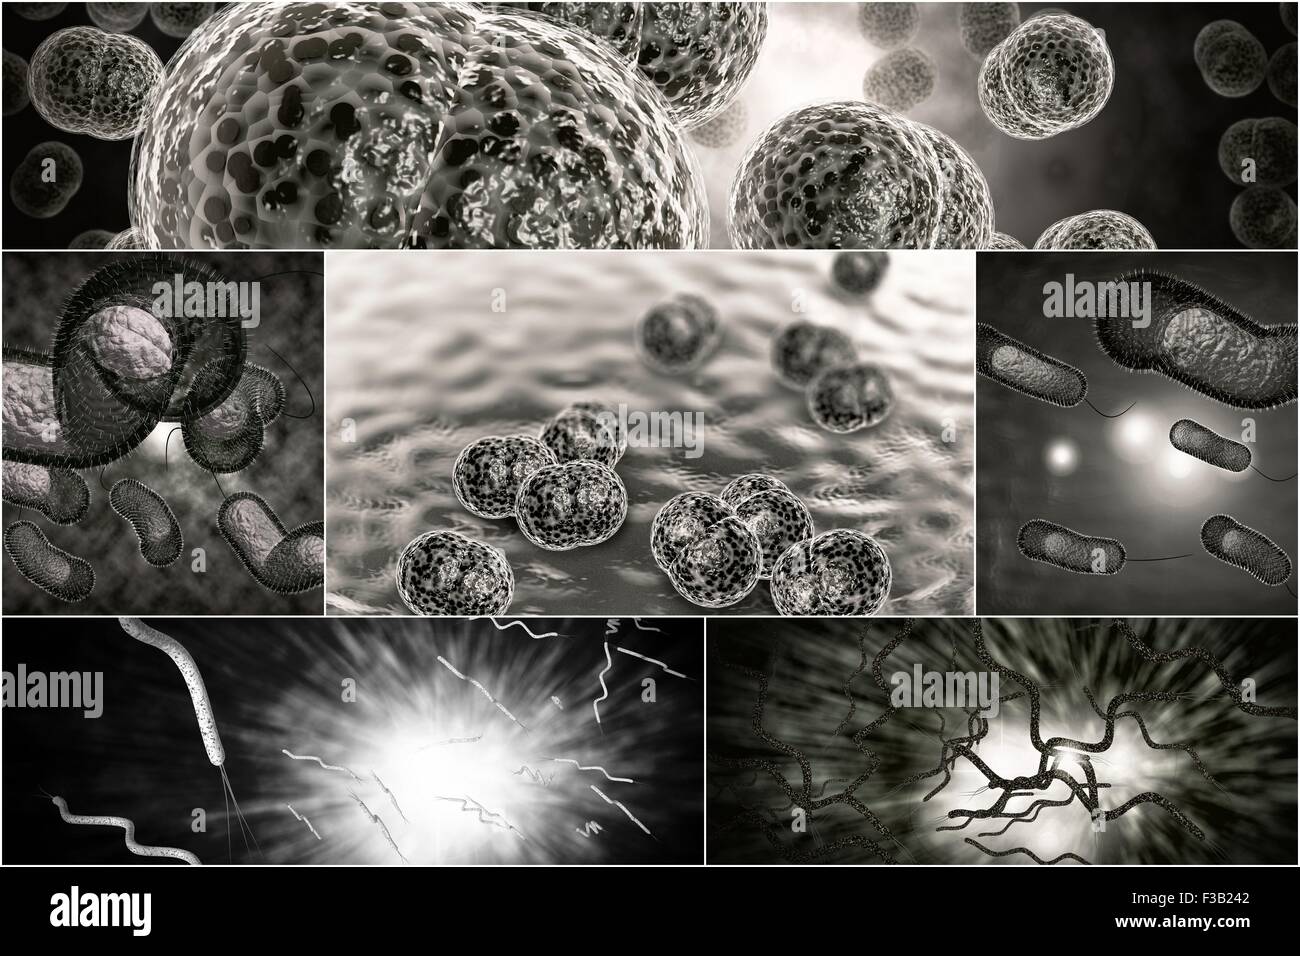 3D microscope close up of various bacteria in collage imagery Stock Photo